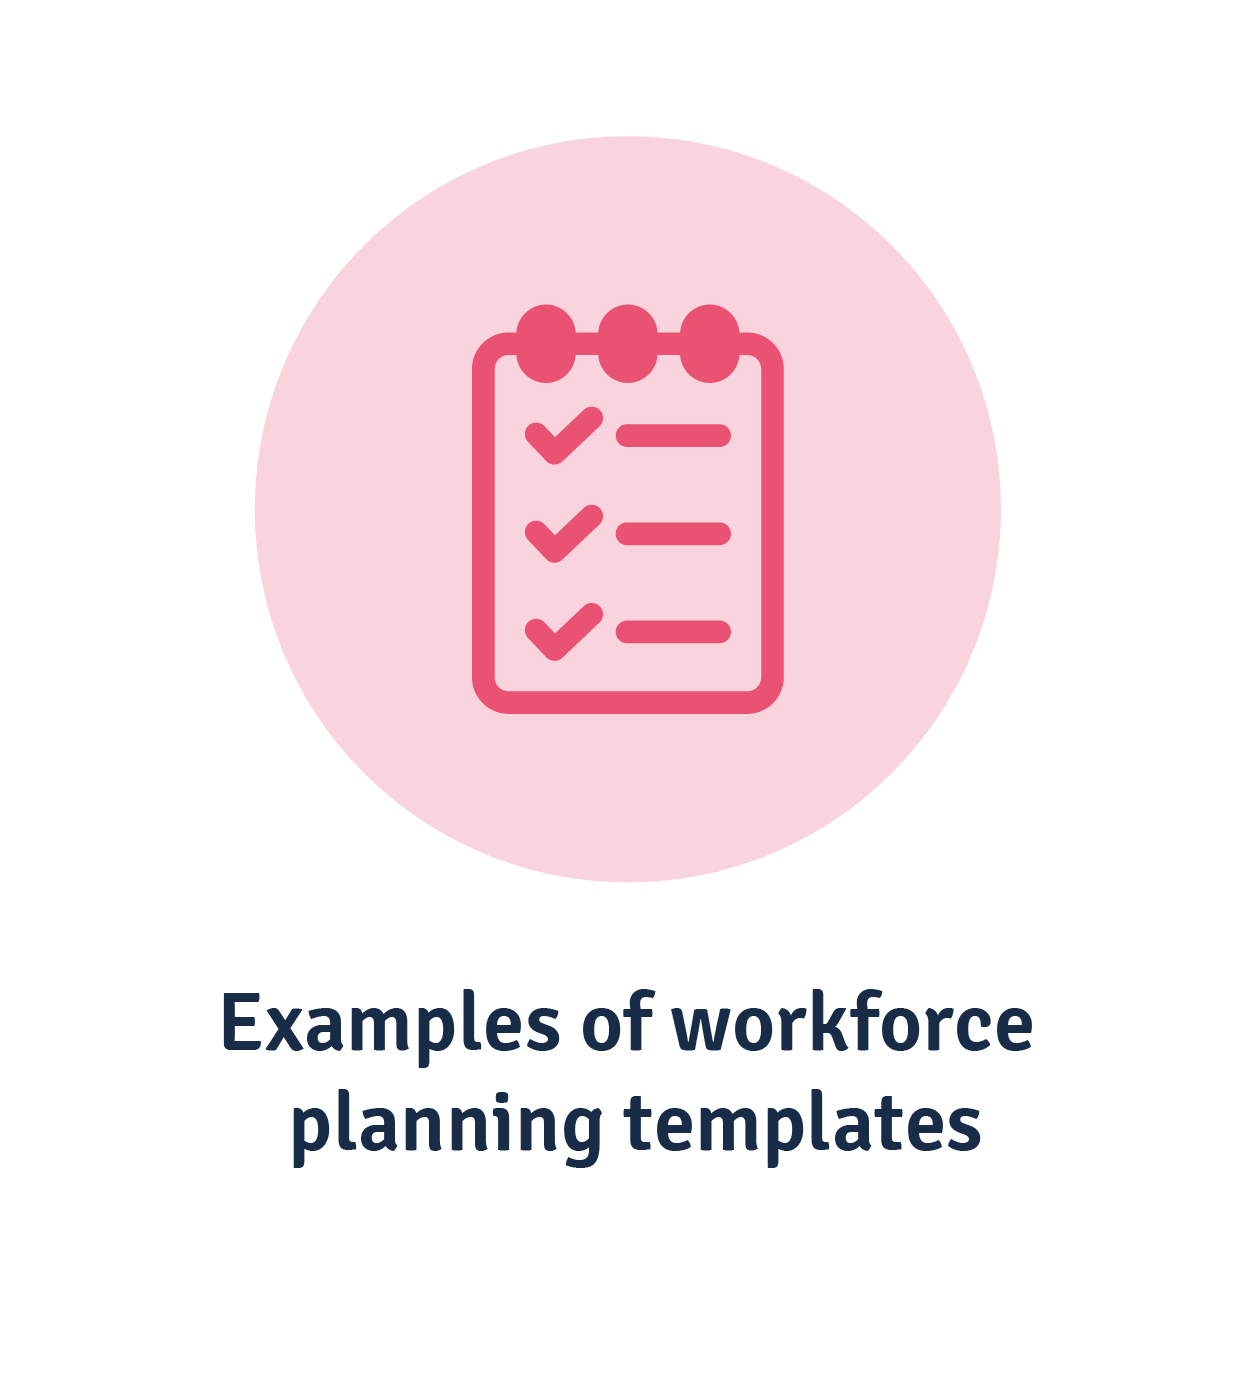 Examples of workforce planning templates